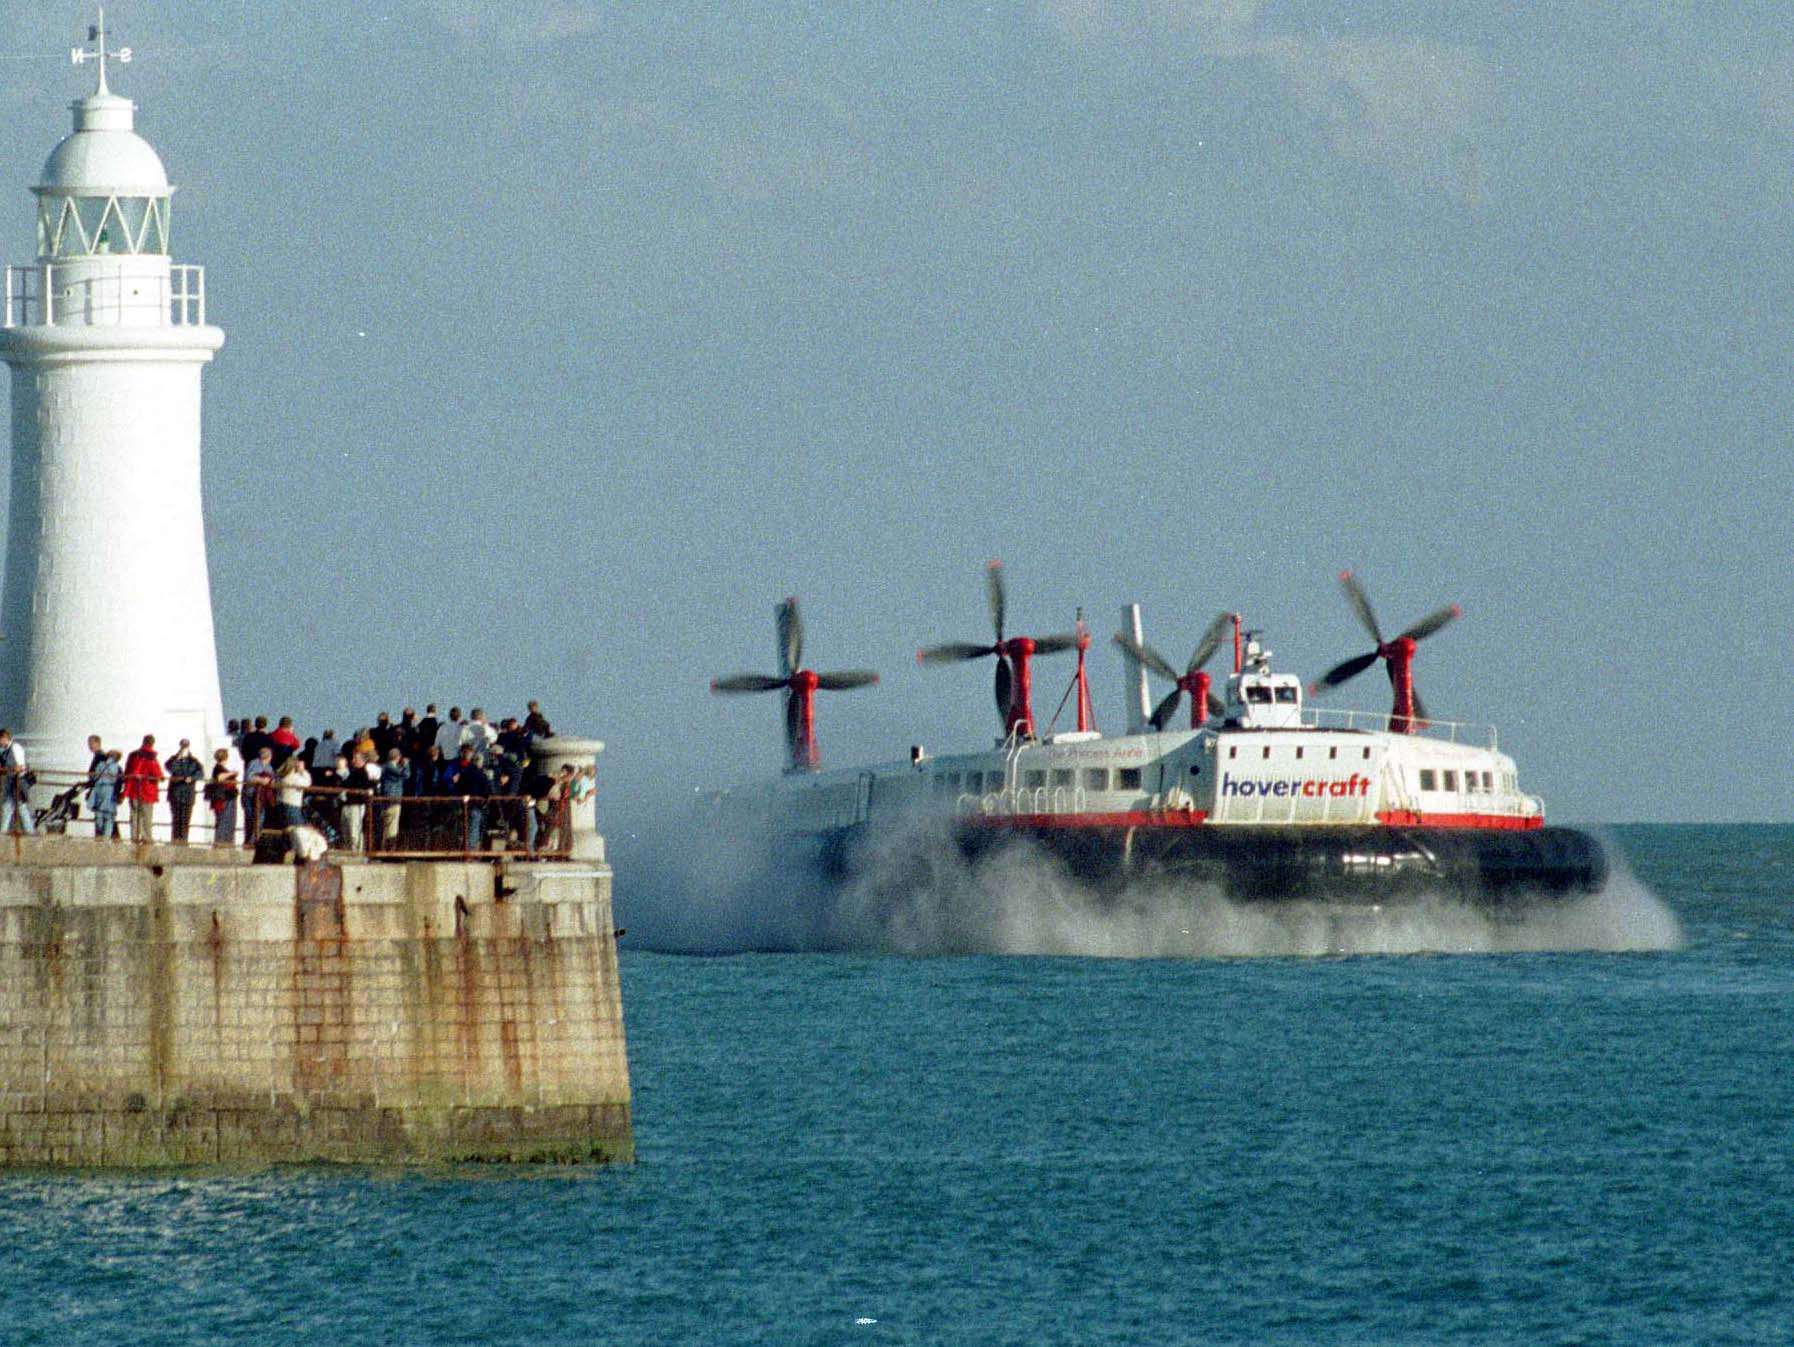 The last Hovercraft crossing took place in 2000. Photographer Paul Amos captured the moment it entered Dover's harbour walls for the last time